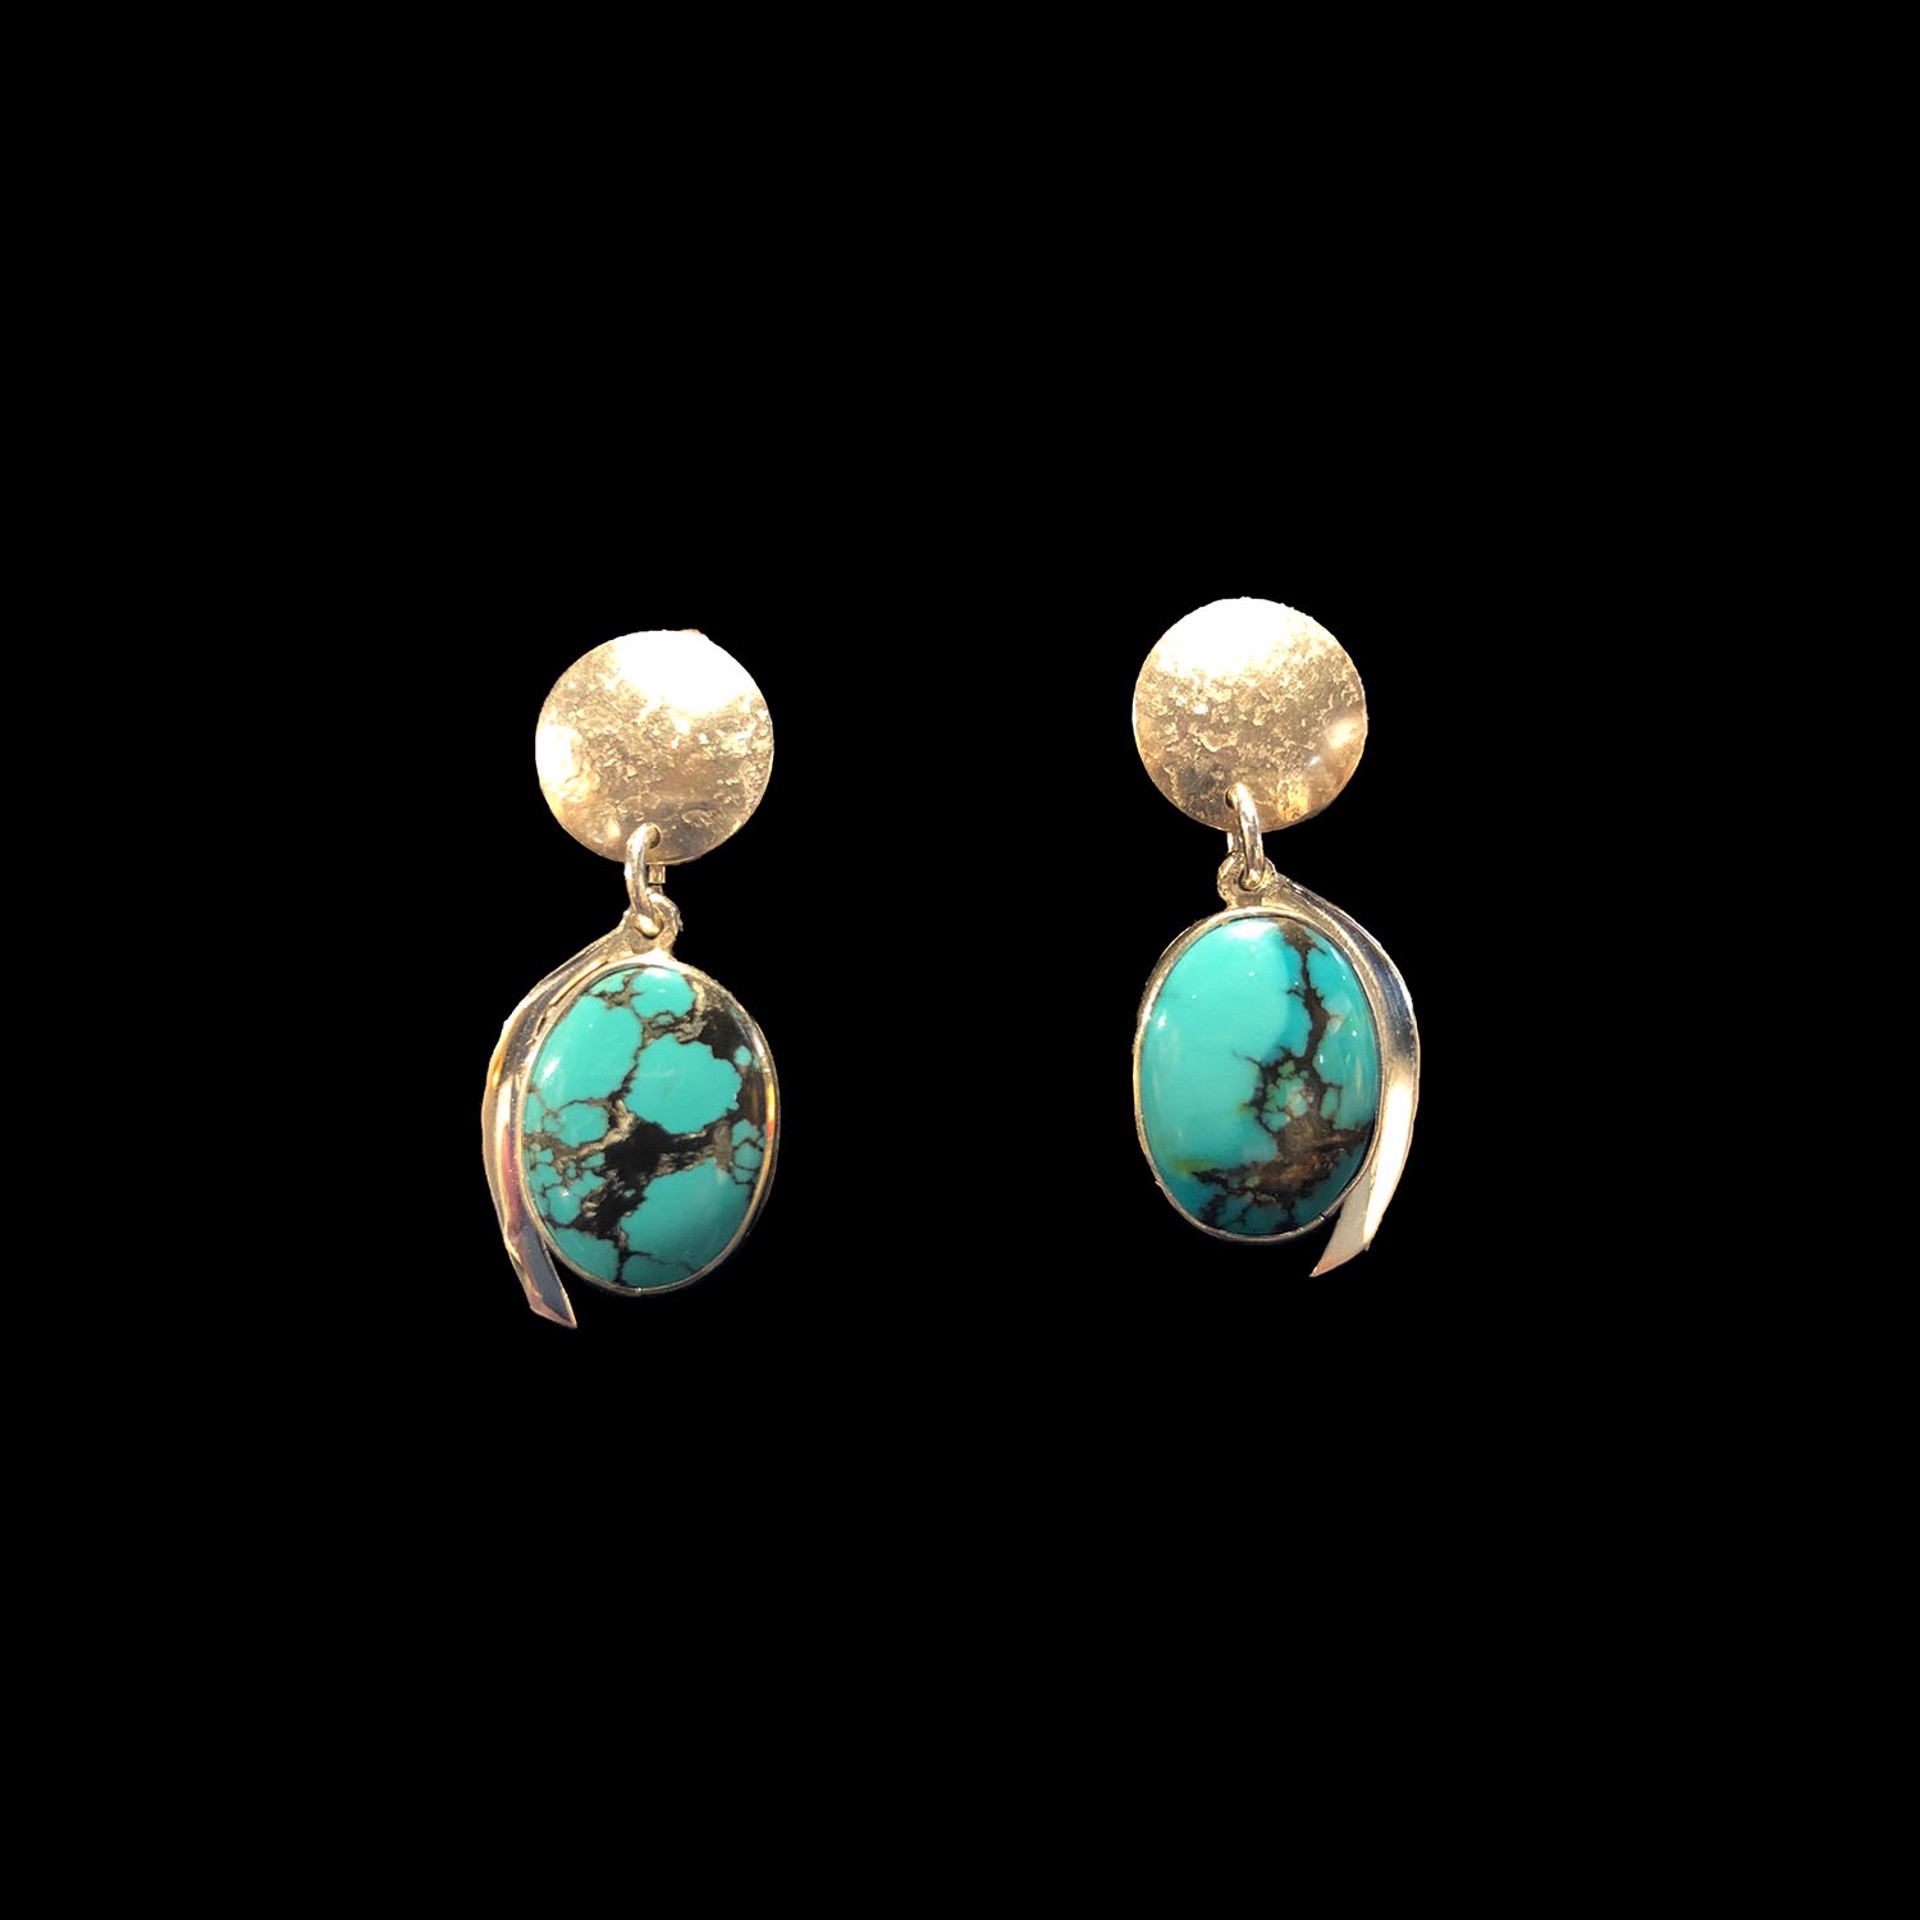 Turquoise Small Earrings by Michael Redhawk